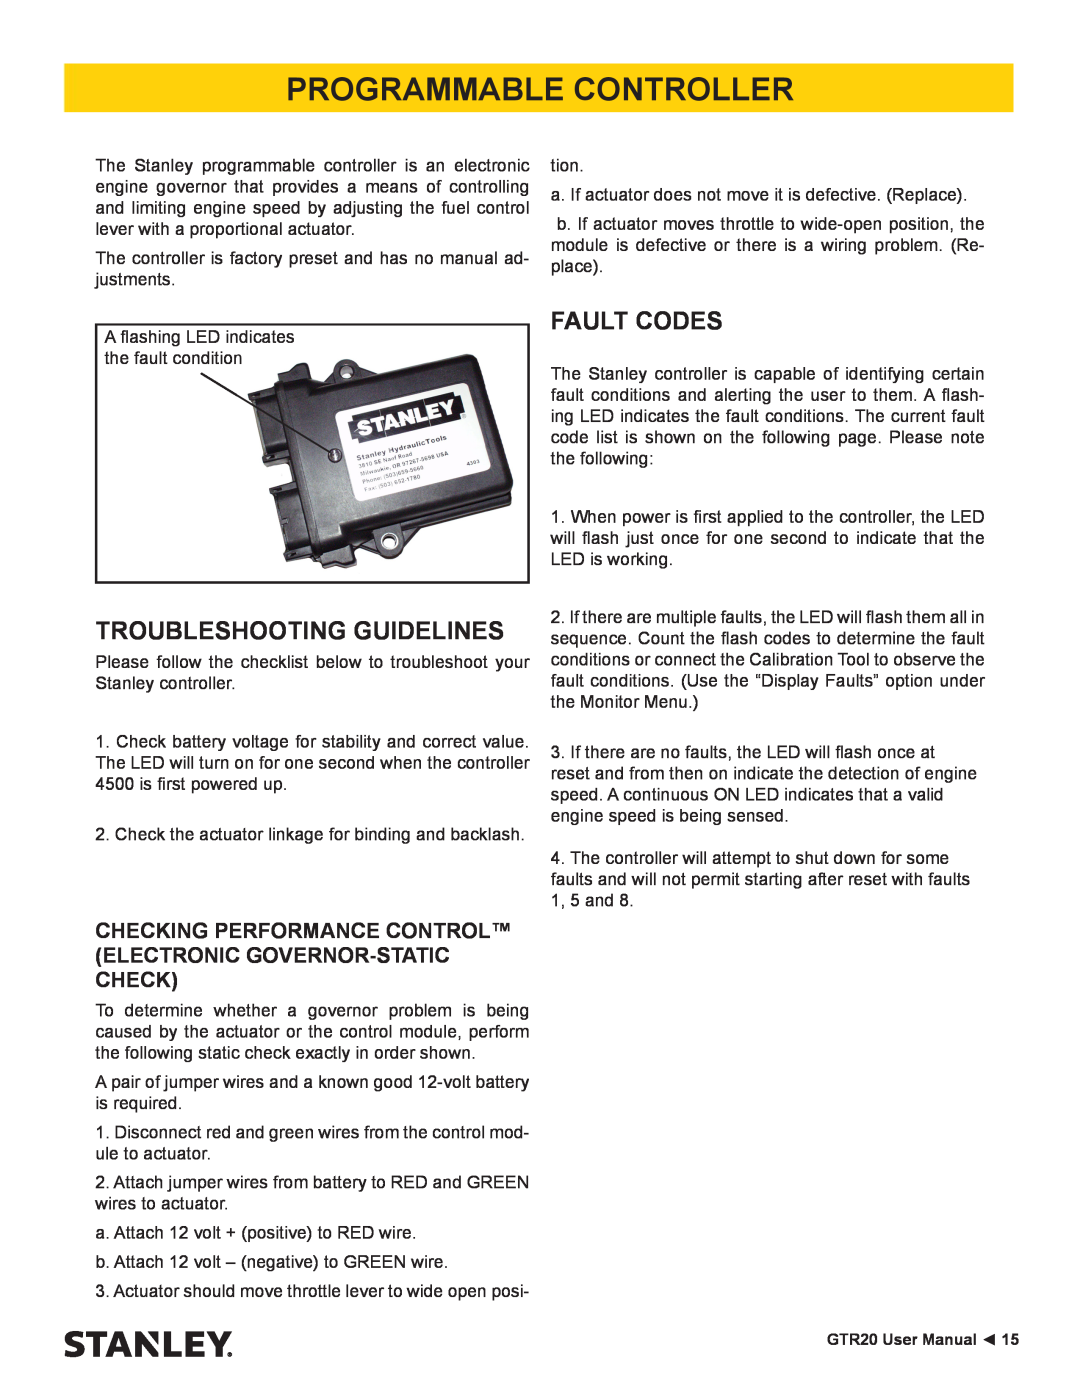 Stanley Black & Decker GTR20 user manual Programmable Controller, Troubleshooting Guidelines, Fault Codes 